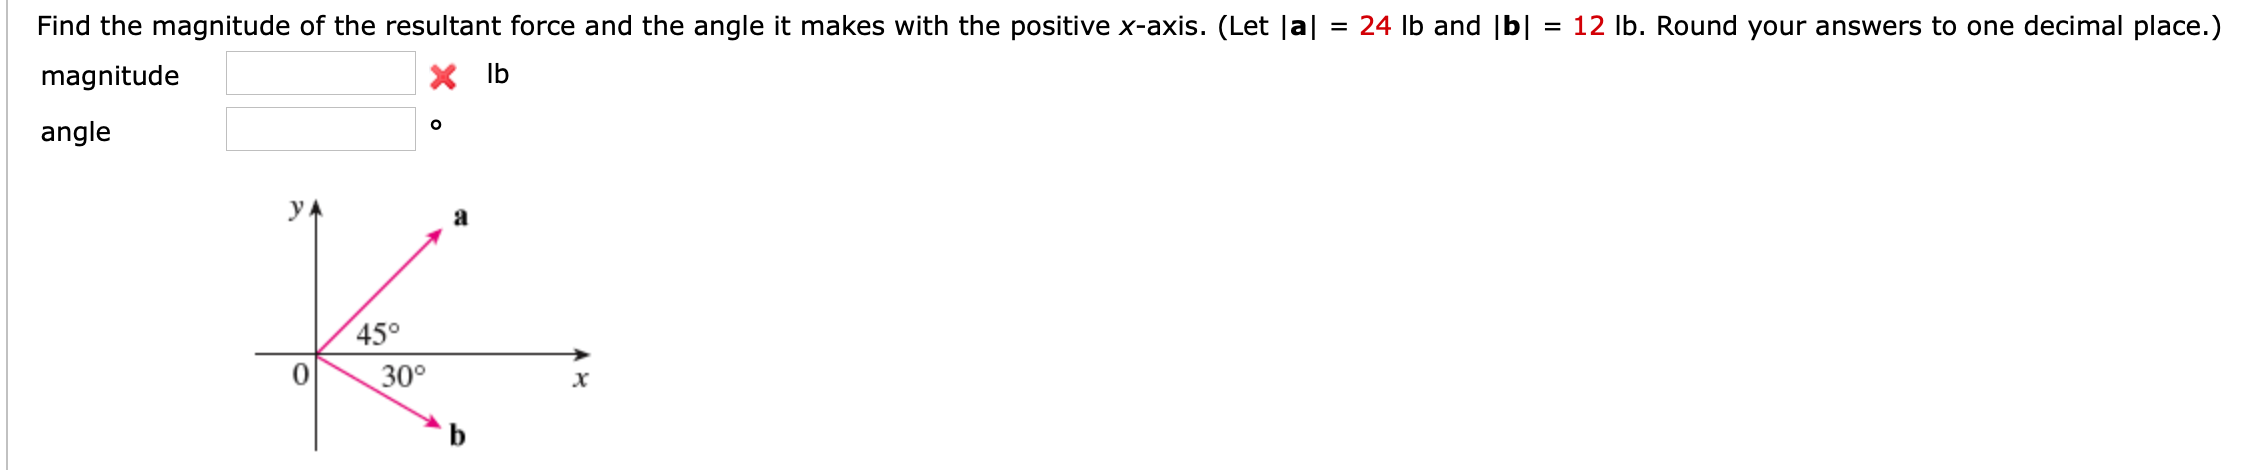 Find the magnitude of the resultant force and the angle it makes with the positive x-axis. (Let |a| = 24 lb and |b||
12 lb. Round your answers to one decimal place.)
%3D
%D
magnitude
X Ib
angle
45°
30°
b
